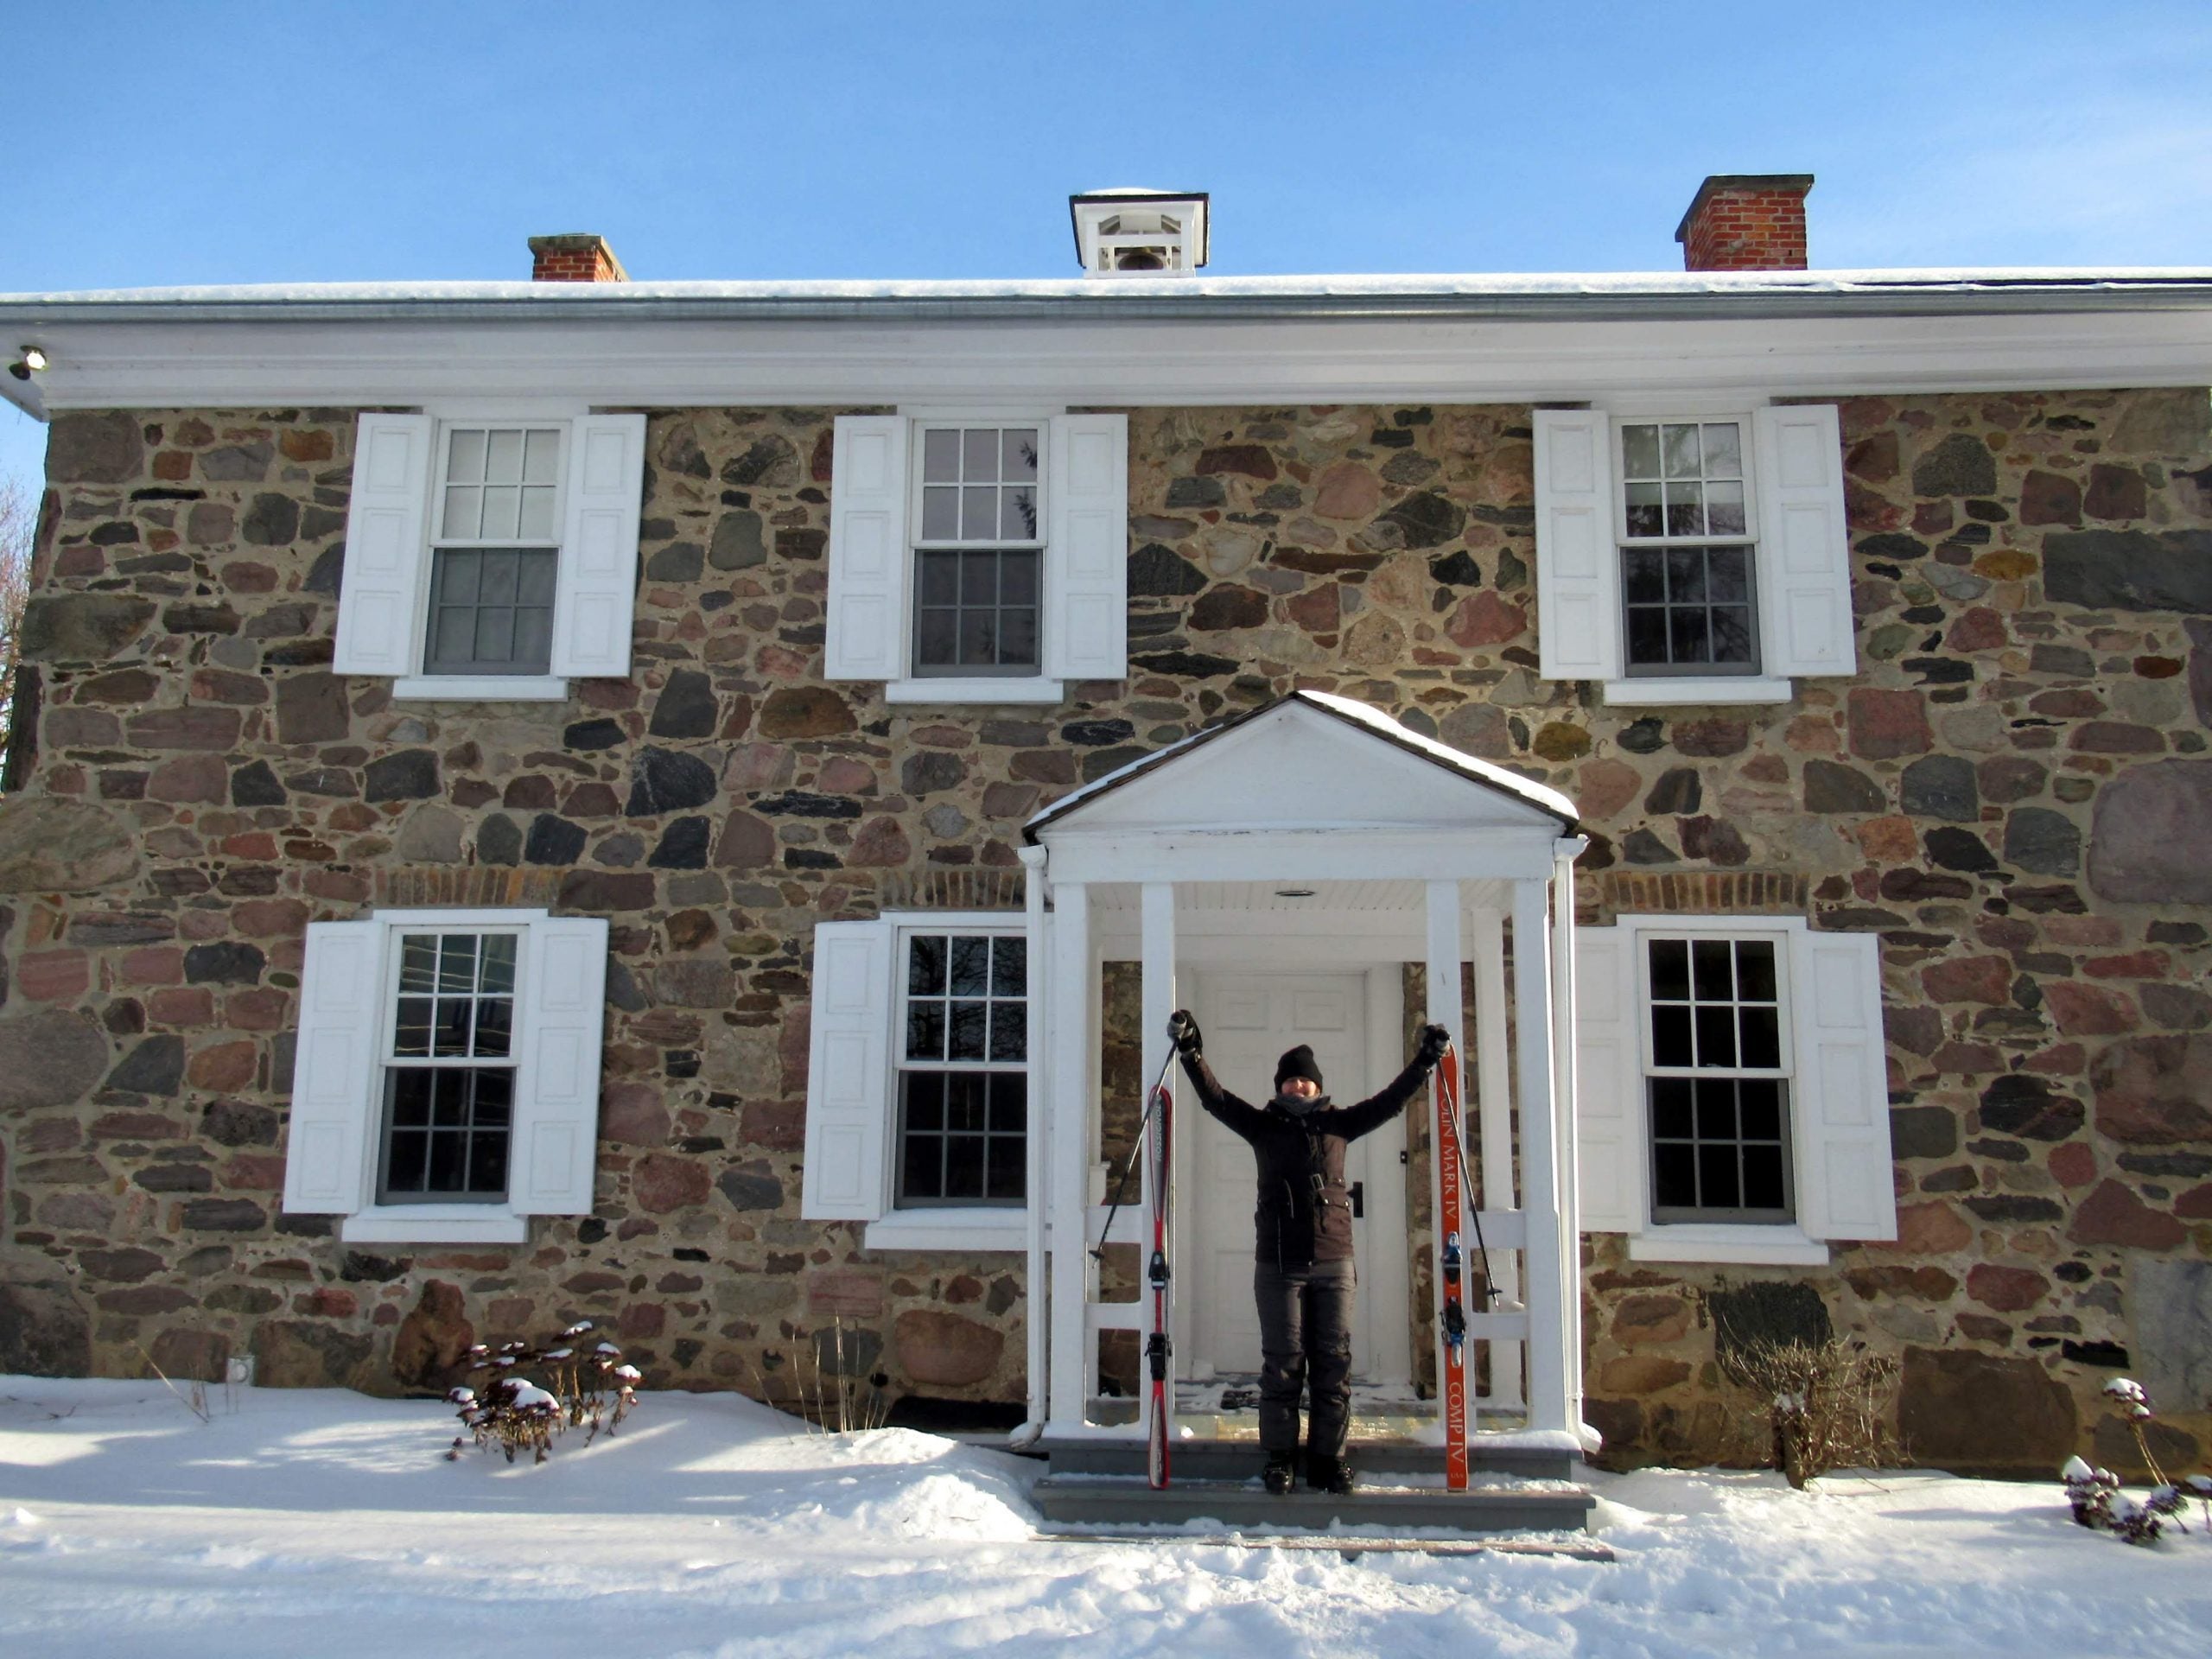 Josh holds his hands in the air on a snowy day outside Brubacher House, with cross country skis